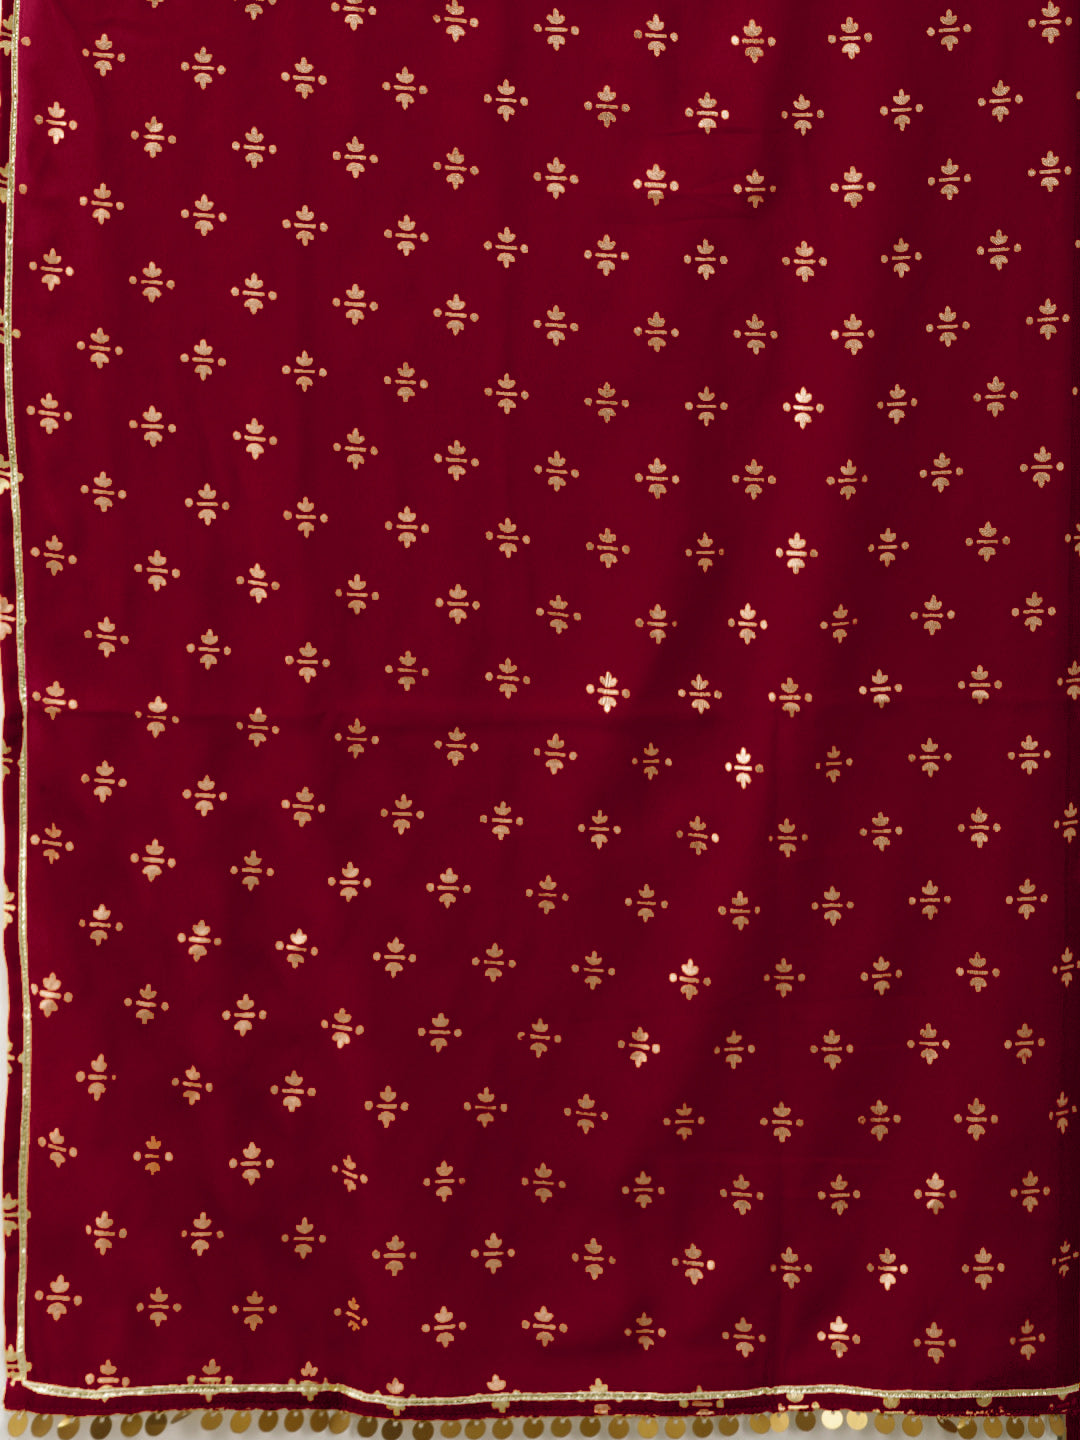 Georgette Maroon Gold Foil Printed Fabric